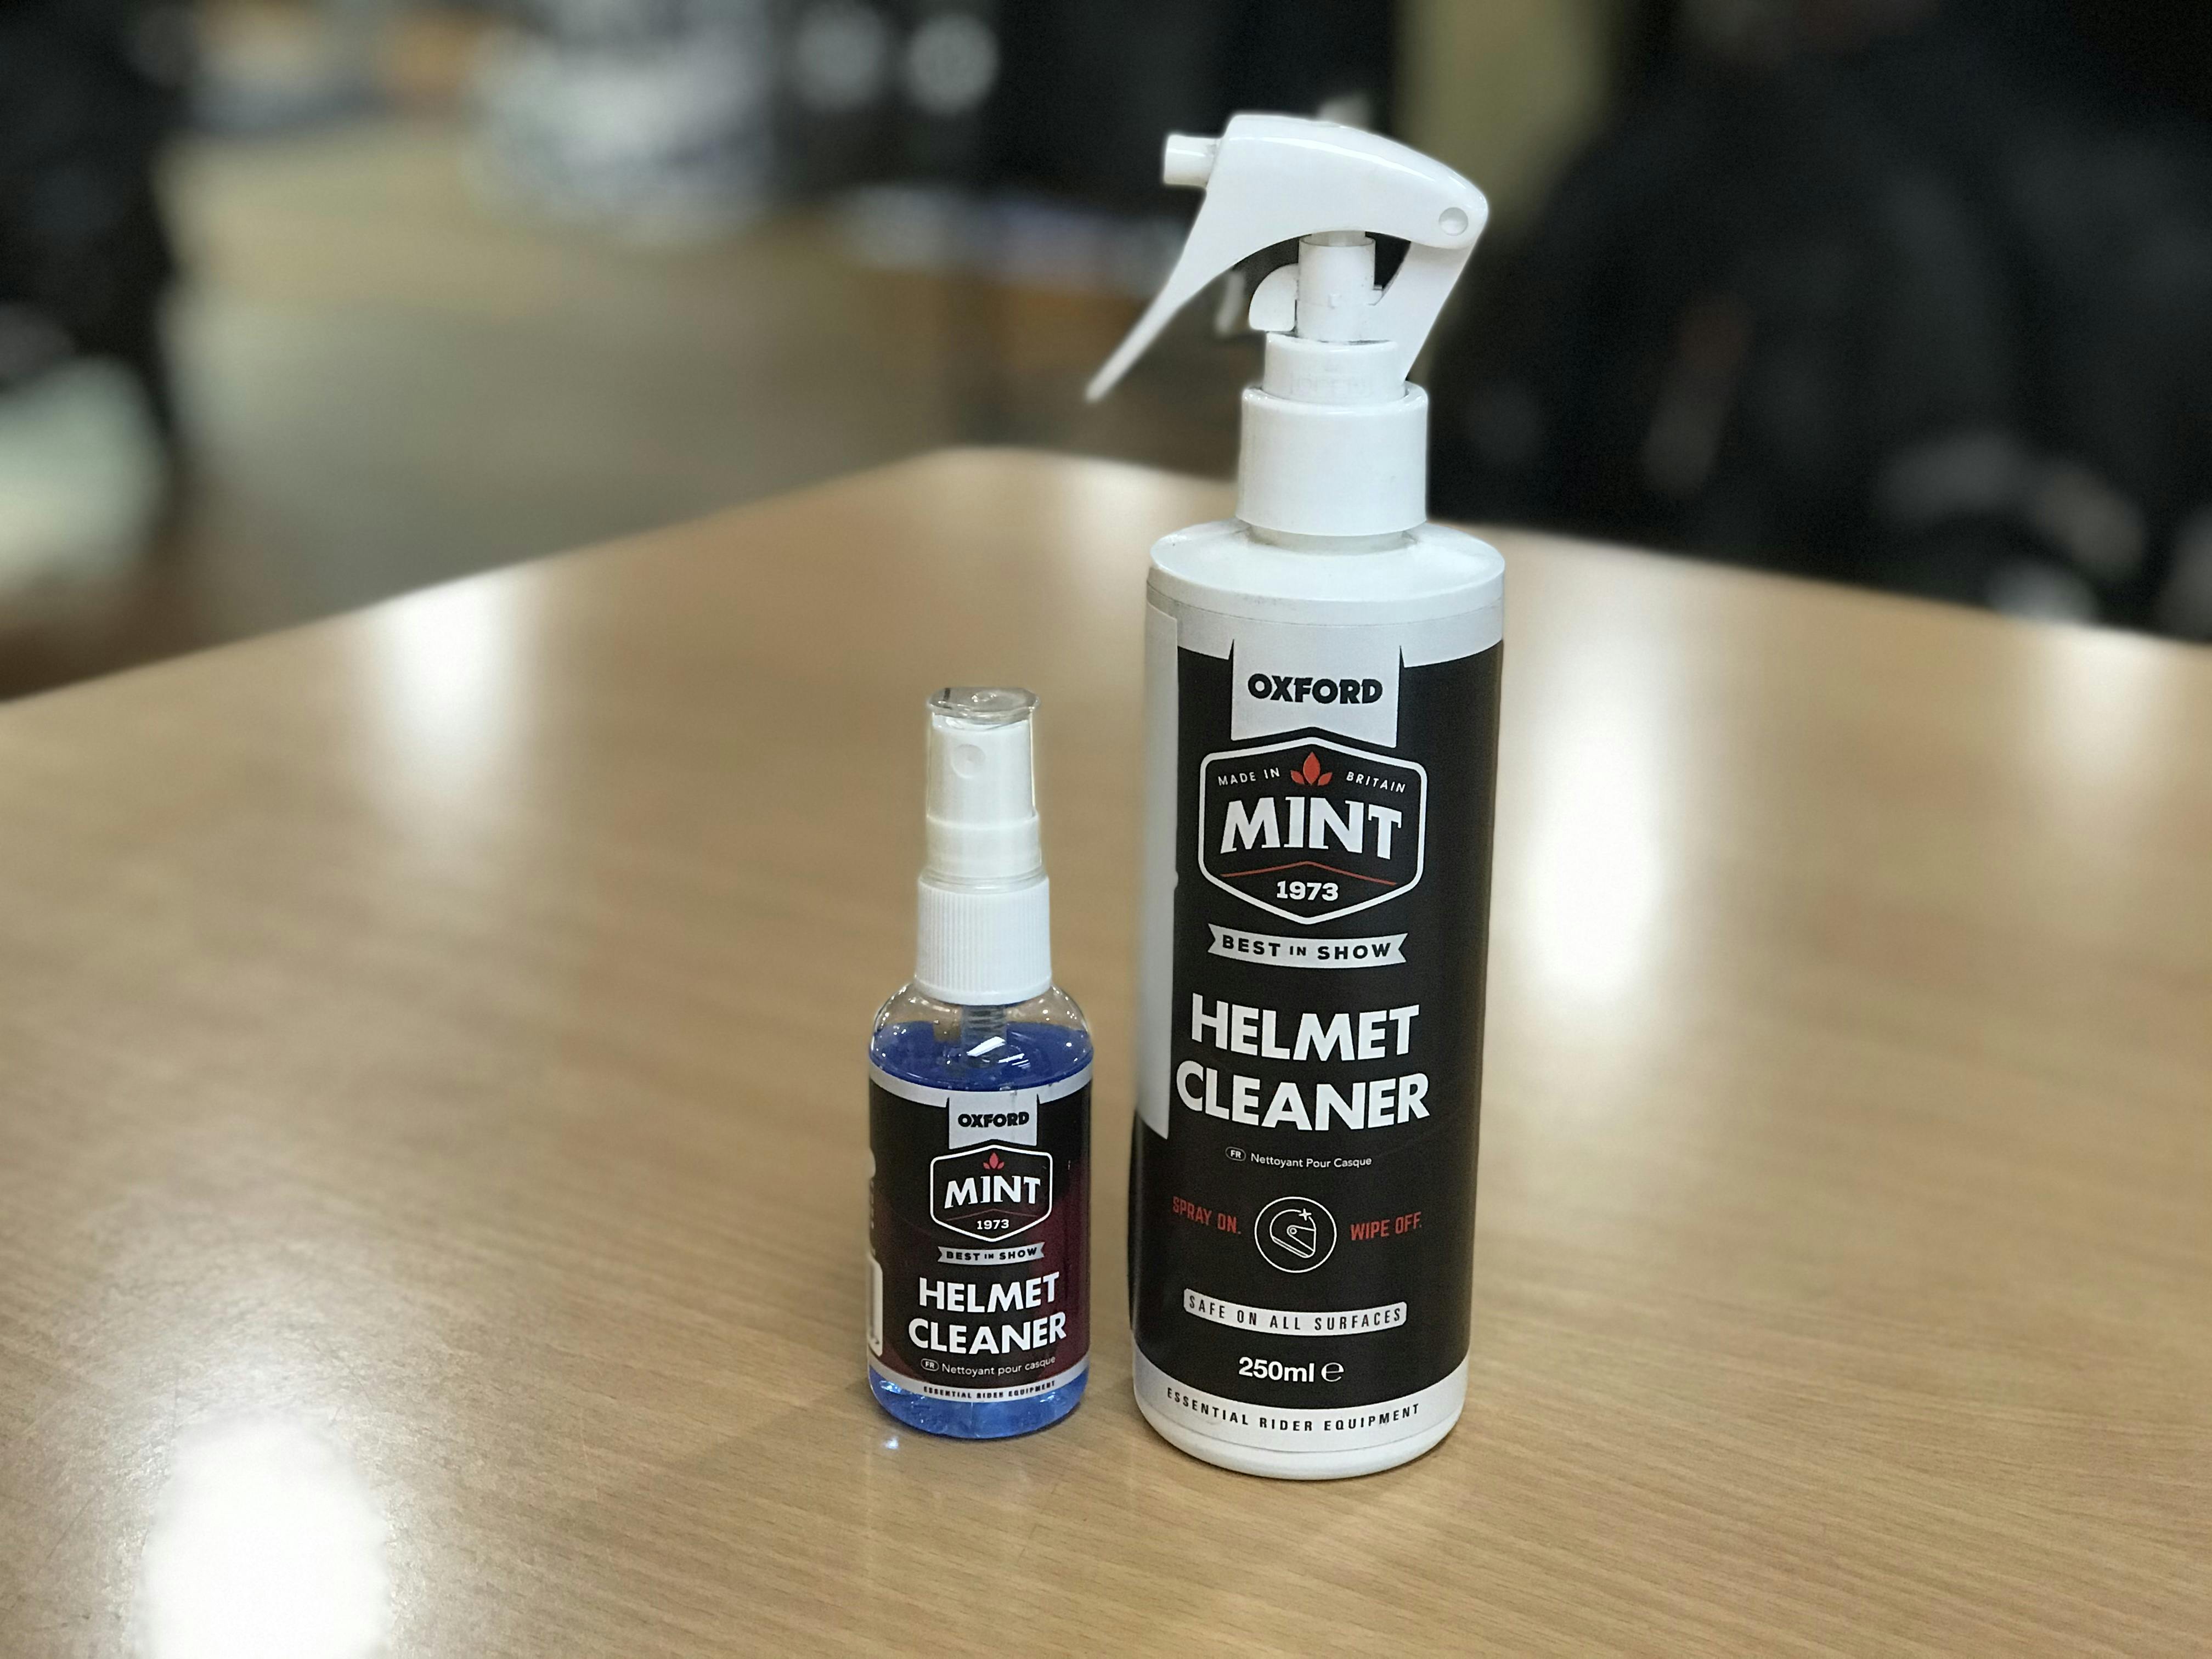 A small and big bottles of Mint Helmet cleaner